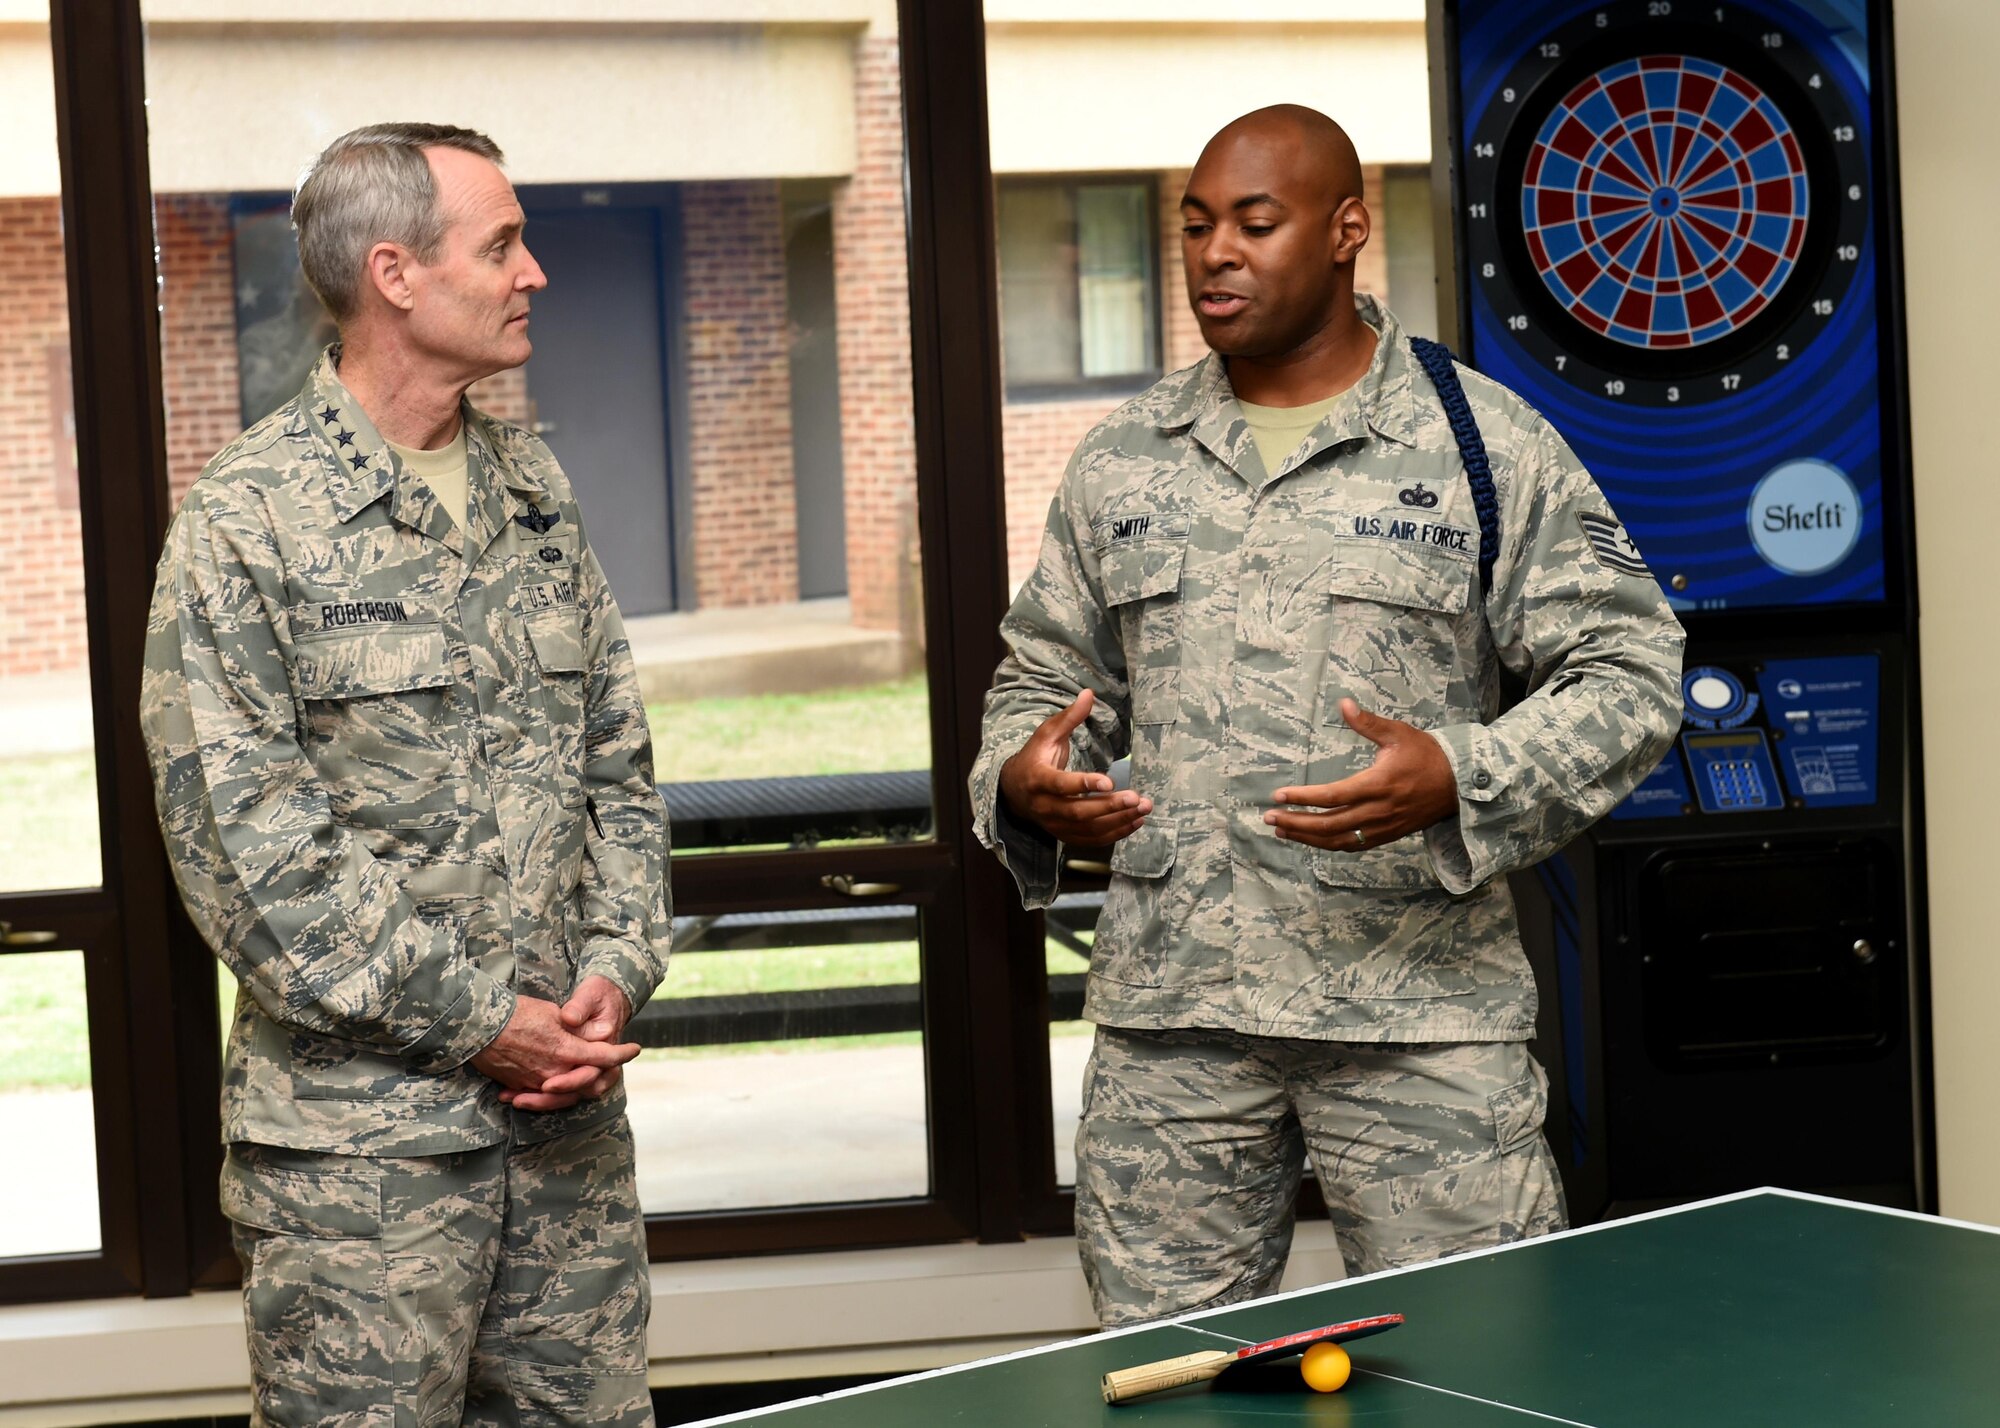 U.S. Air Force Tech. Sgt. Mark Smith, 97th Training Squadron military training leader, explains the improvements done to the 97th TRS dorms to U.S. Air Force Lt. Gen. Darryl Roberson, commander  of Air Education Training Command, April 26, 2016, at Altus Air Force Base, Okla. Roberson visited Altus AFB to gain a better understanding of the base’s training mission and discuss Air Force topics, including the U.S. Air Force KC-46 Pegasus, the importance of AETC missions and the need for innovation in the U.S. Air Force.  (U.S. Air Force photo by Airman 1st Class Kirby Turbak/Released)